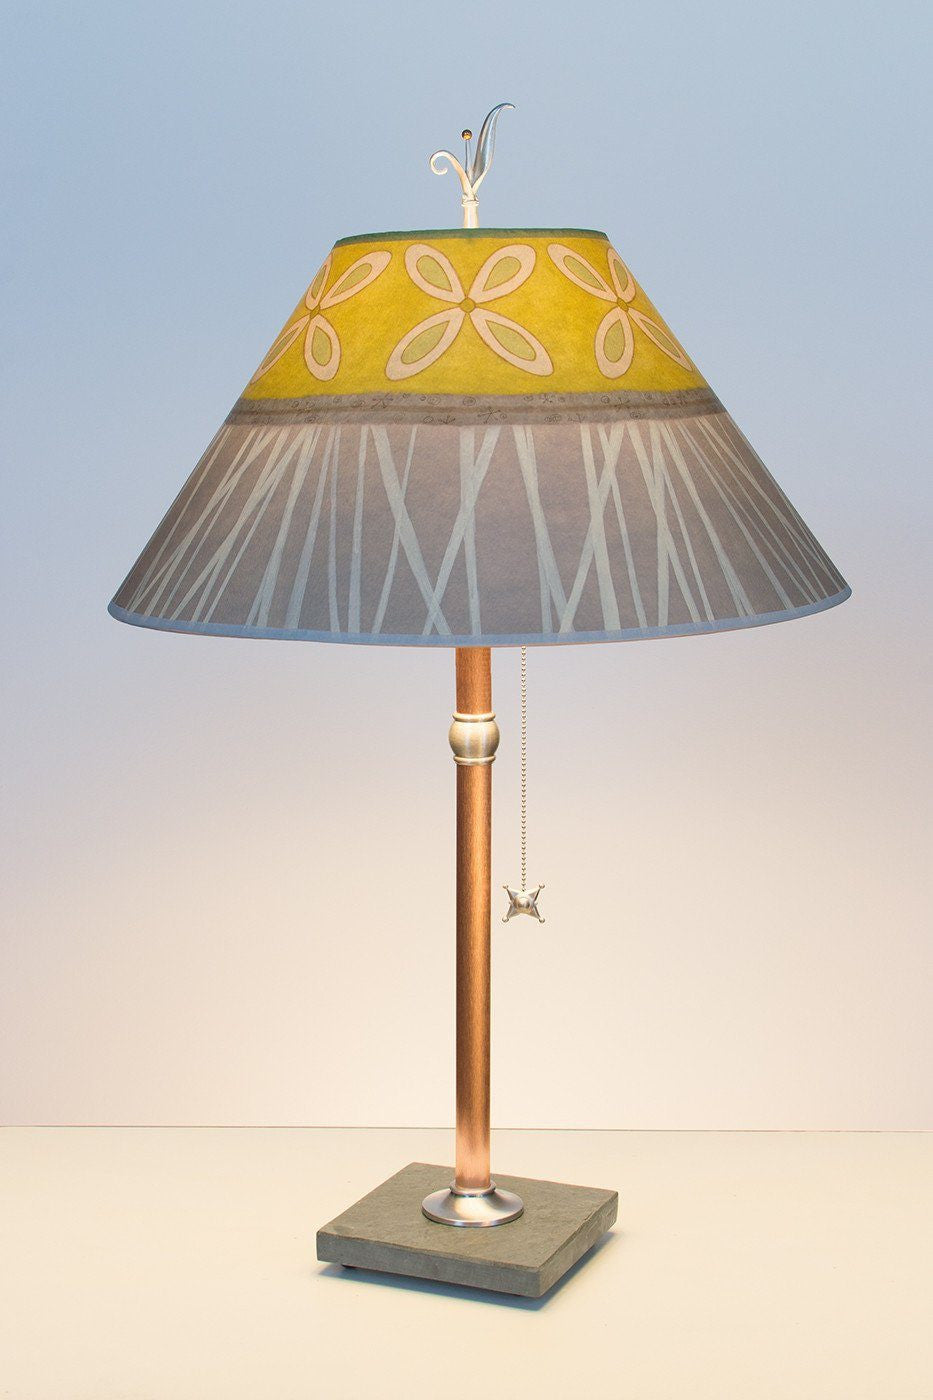 Janna Ugone &amp; Co Table Lamps Copper Table Lamp with Large Conical Shade in Kiwi